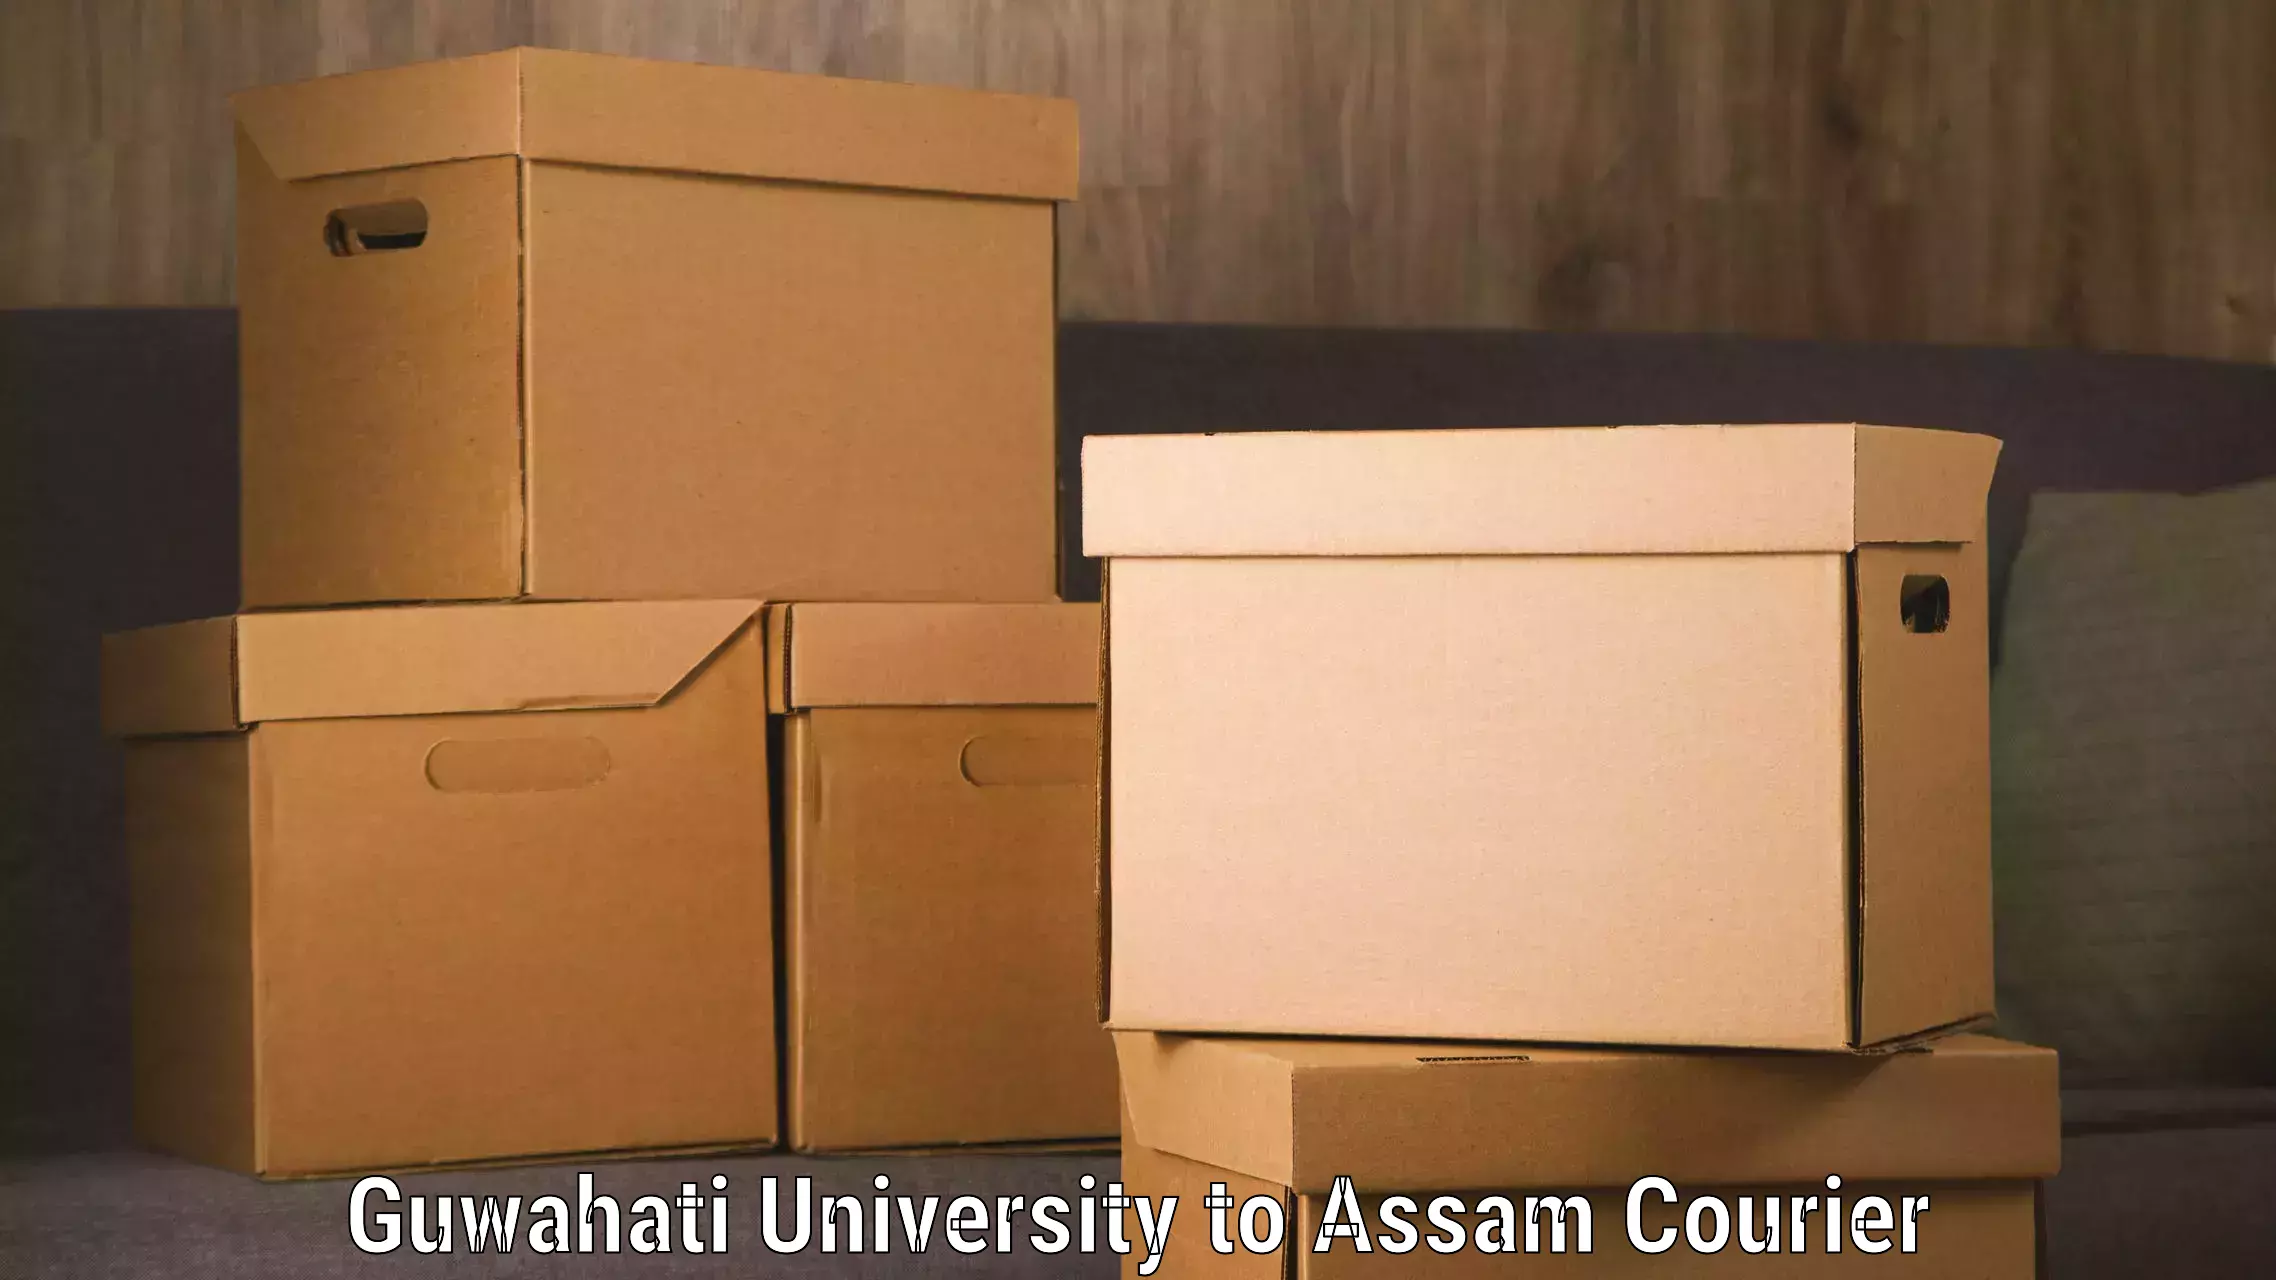 Luggage delivery providers Guwahati University to Tezpur University